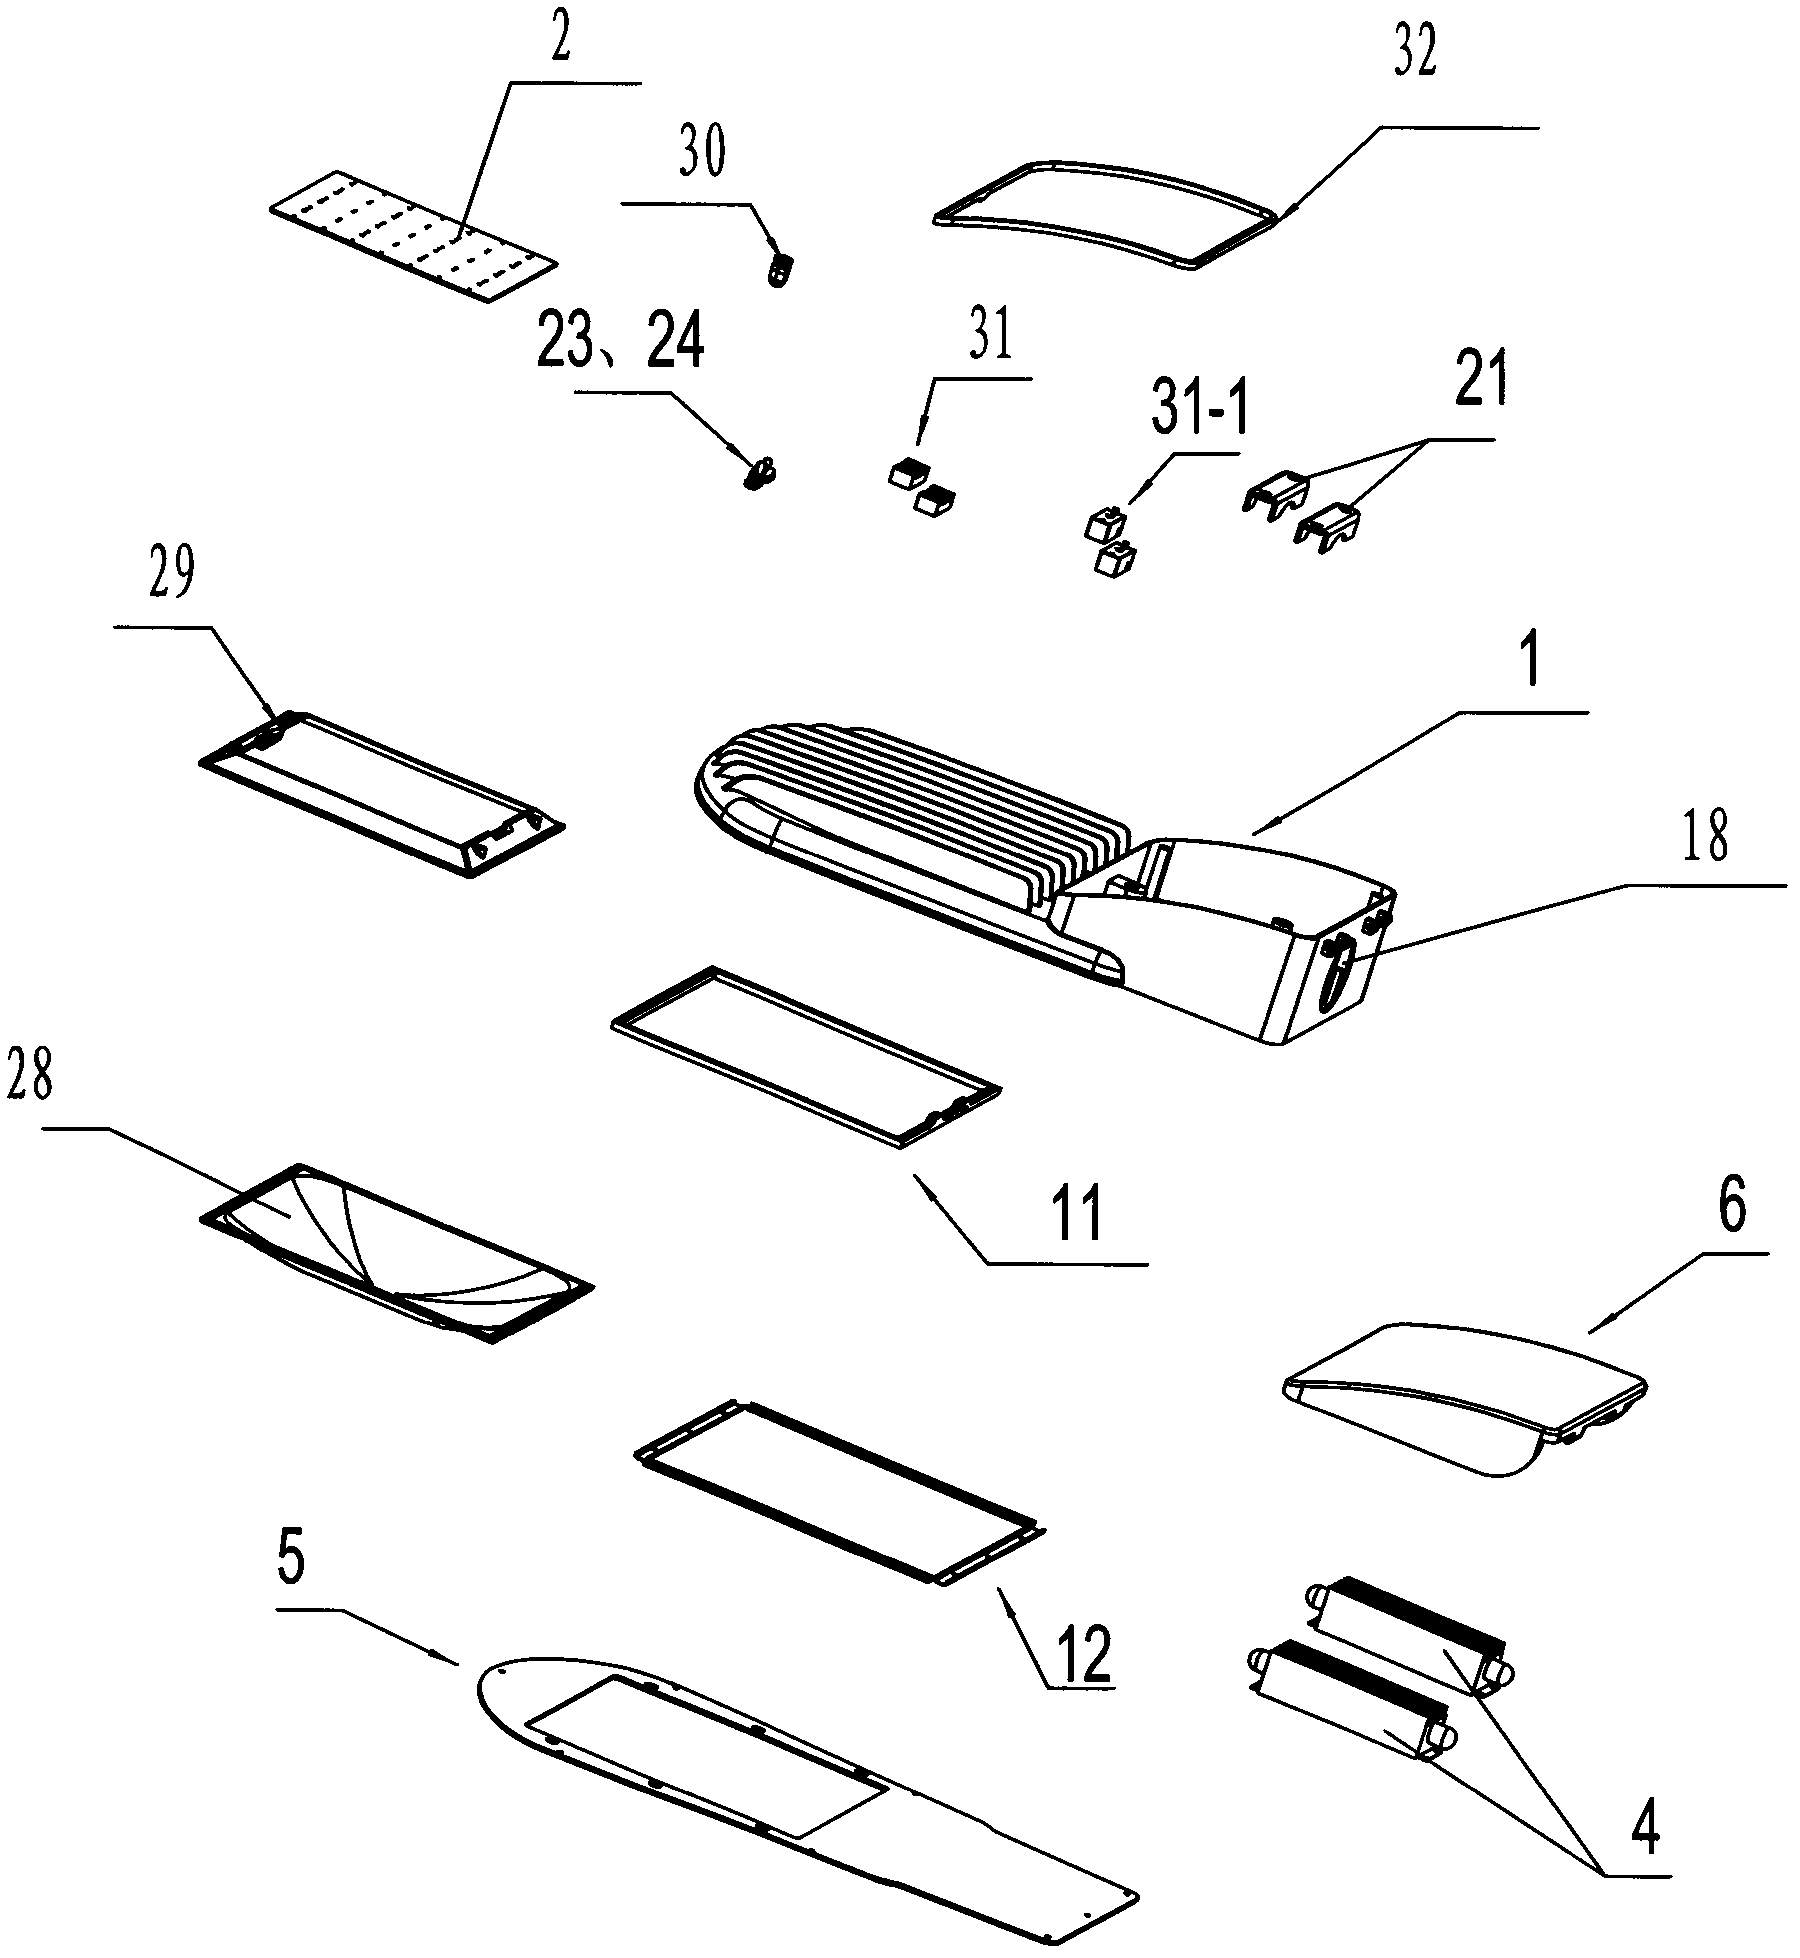 Light emitting diode (LED) lamp with front and rear cavity structures